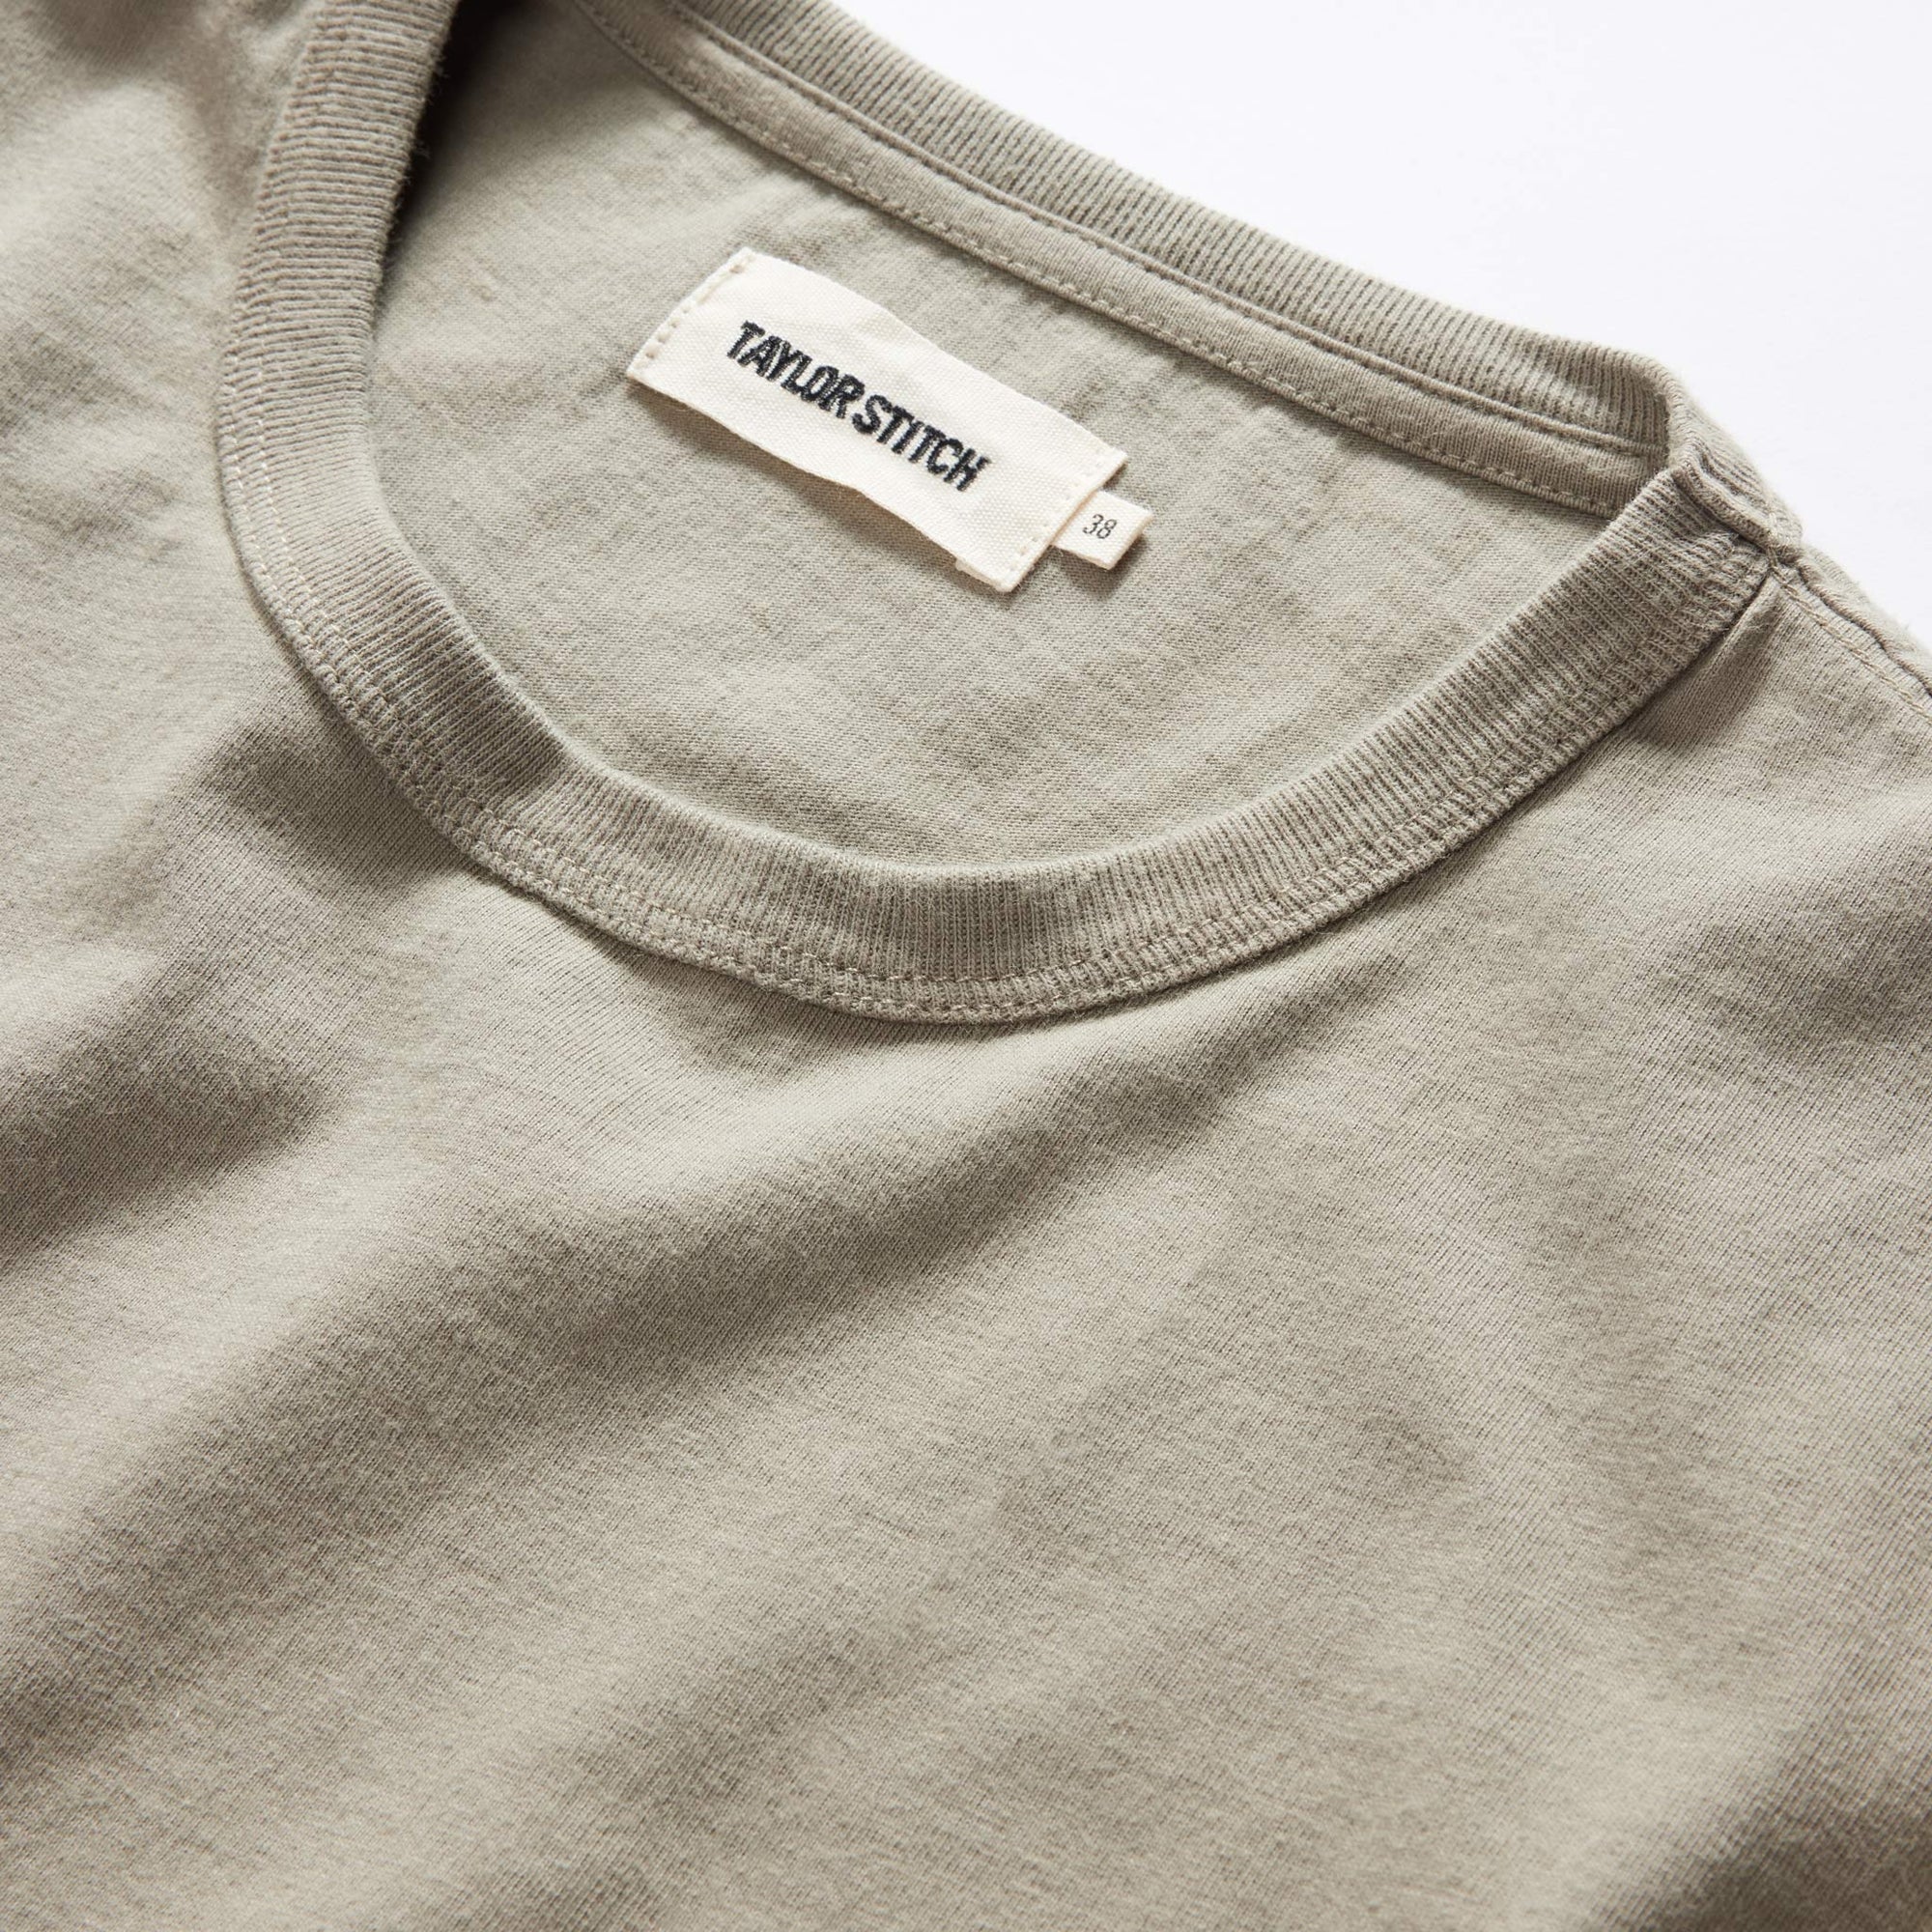 Taylor Stitch - The Organic Cotton Tee in Dried Sage